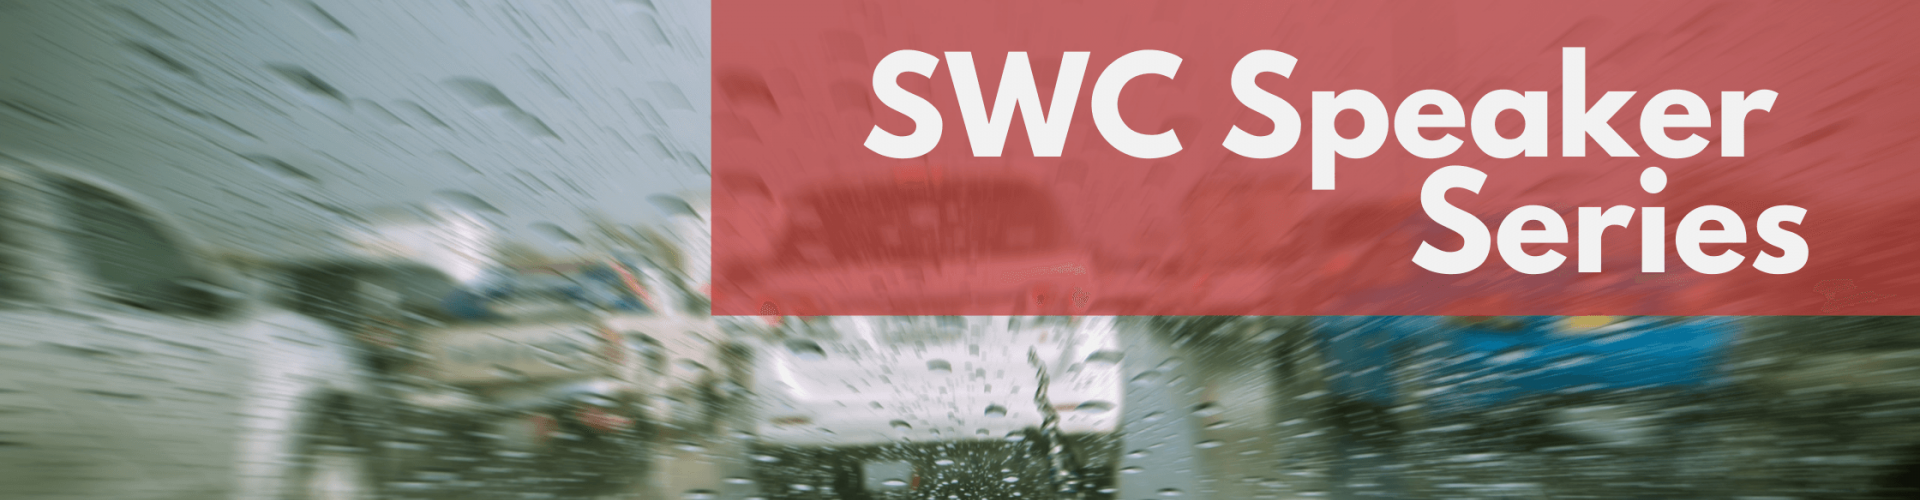 Photo of windshield of car on a rainy day on the highway with text overlaid "SWC Speaker Series"